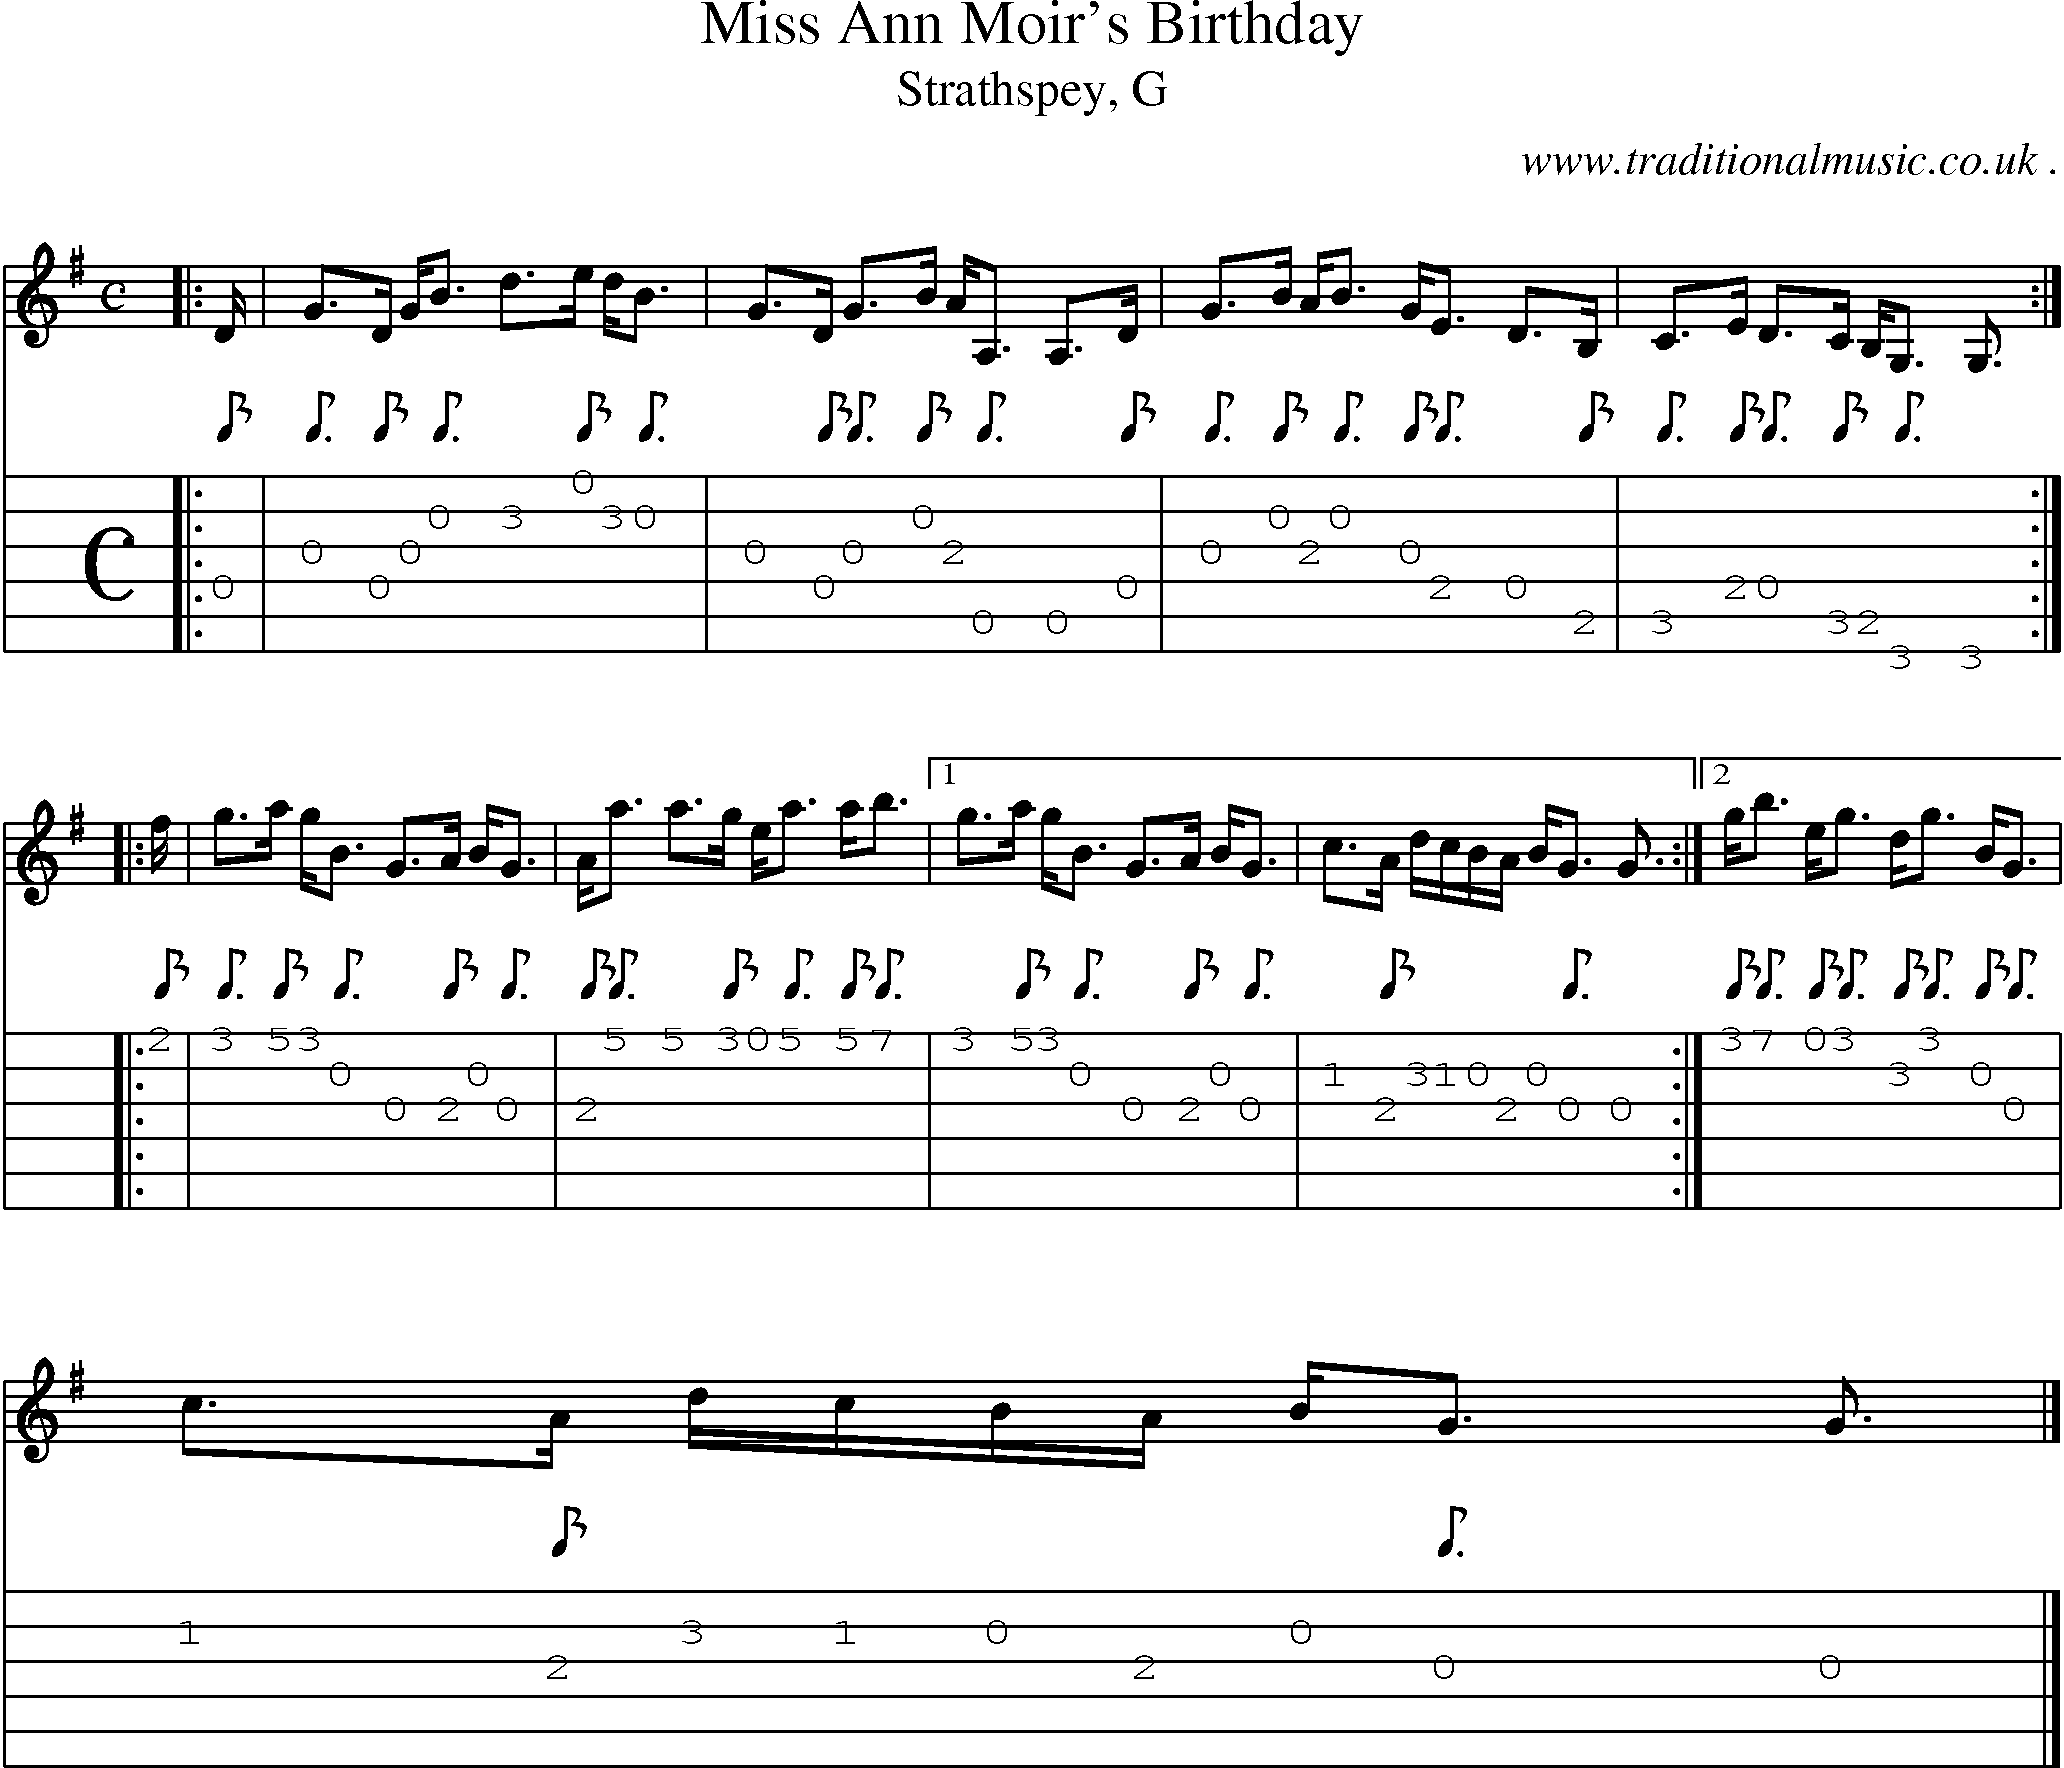 Sheet-music  score, Chords and Guitar Tabs for Miss Ann Moirs Birthday